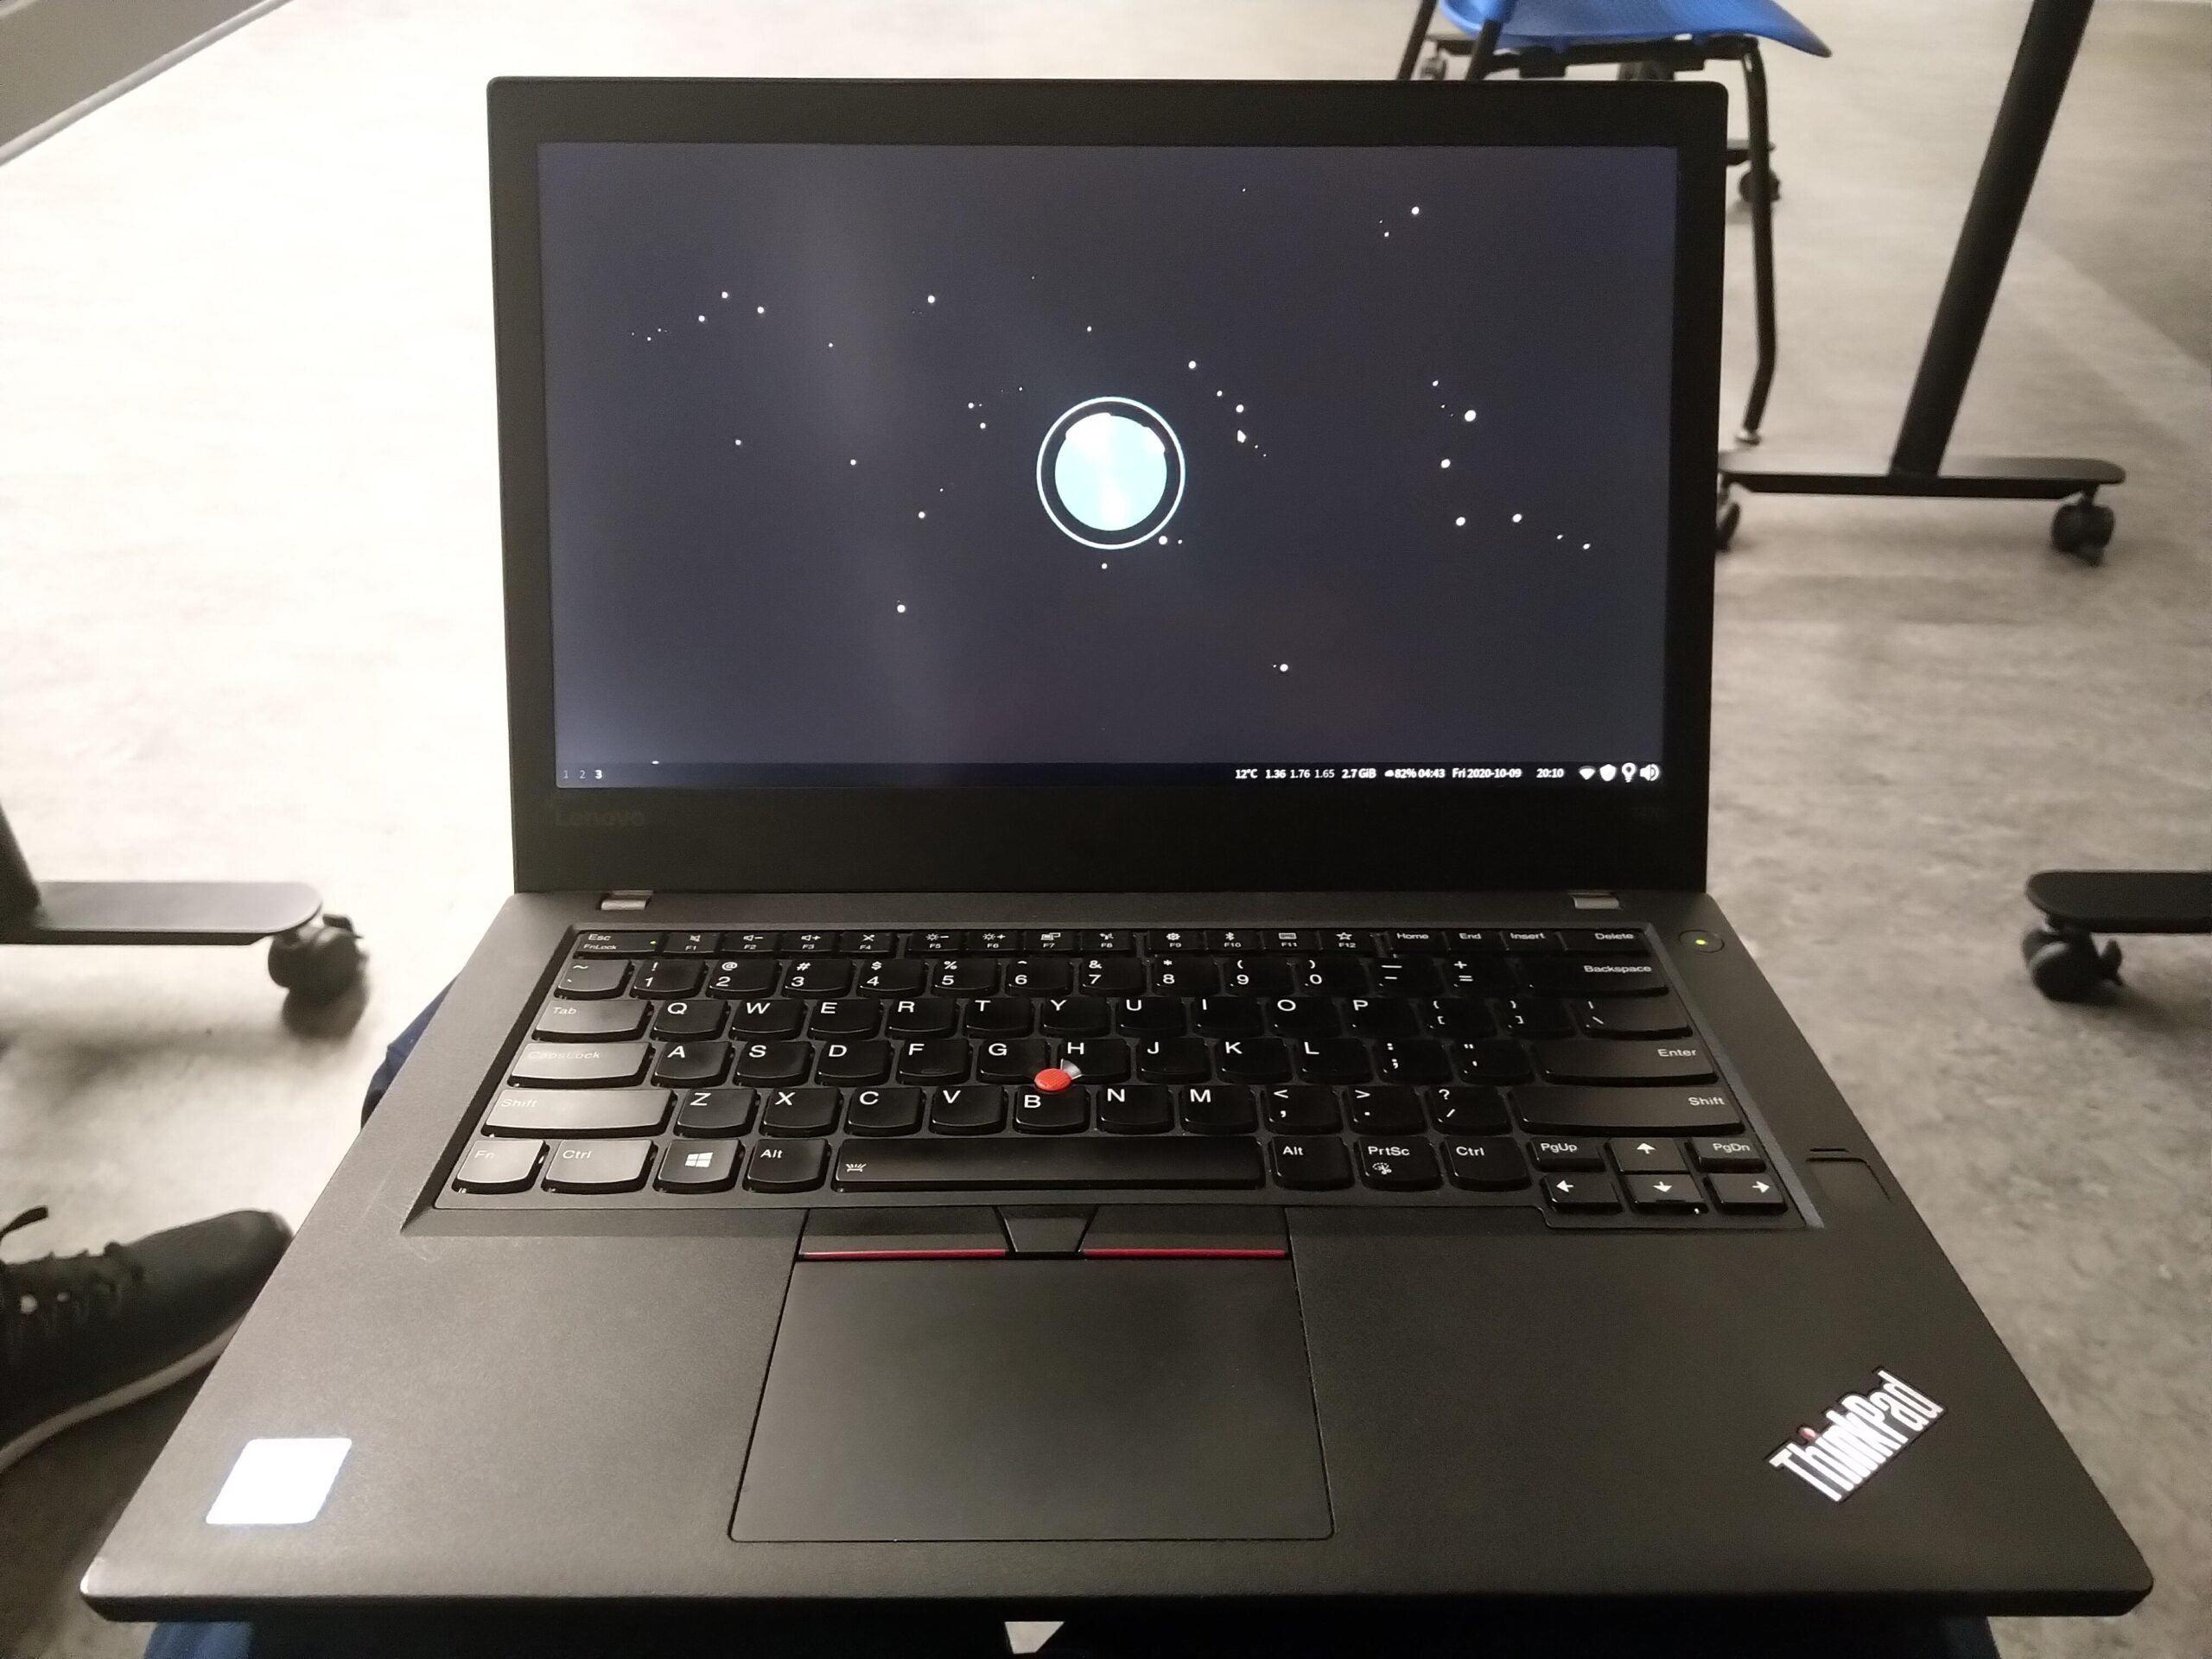 a laptop. the desktop has a wallpaper with a drawing of the earth and some stars.